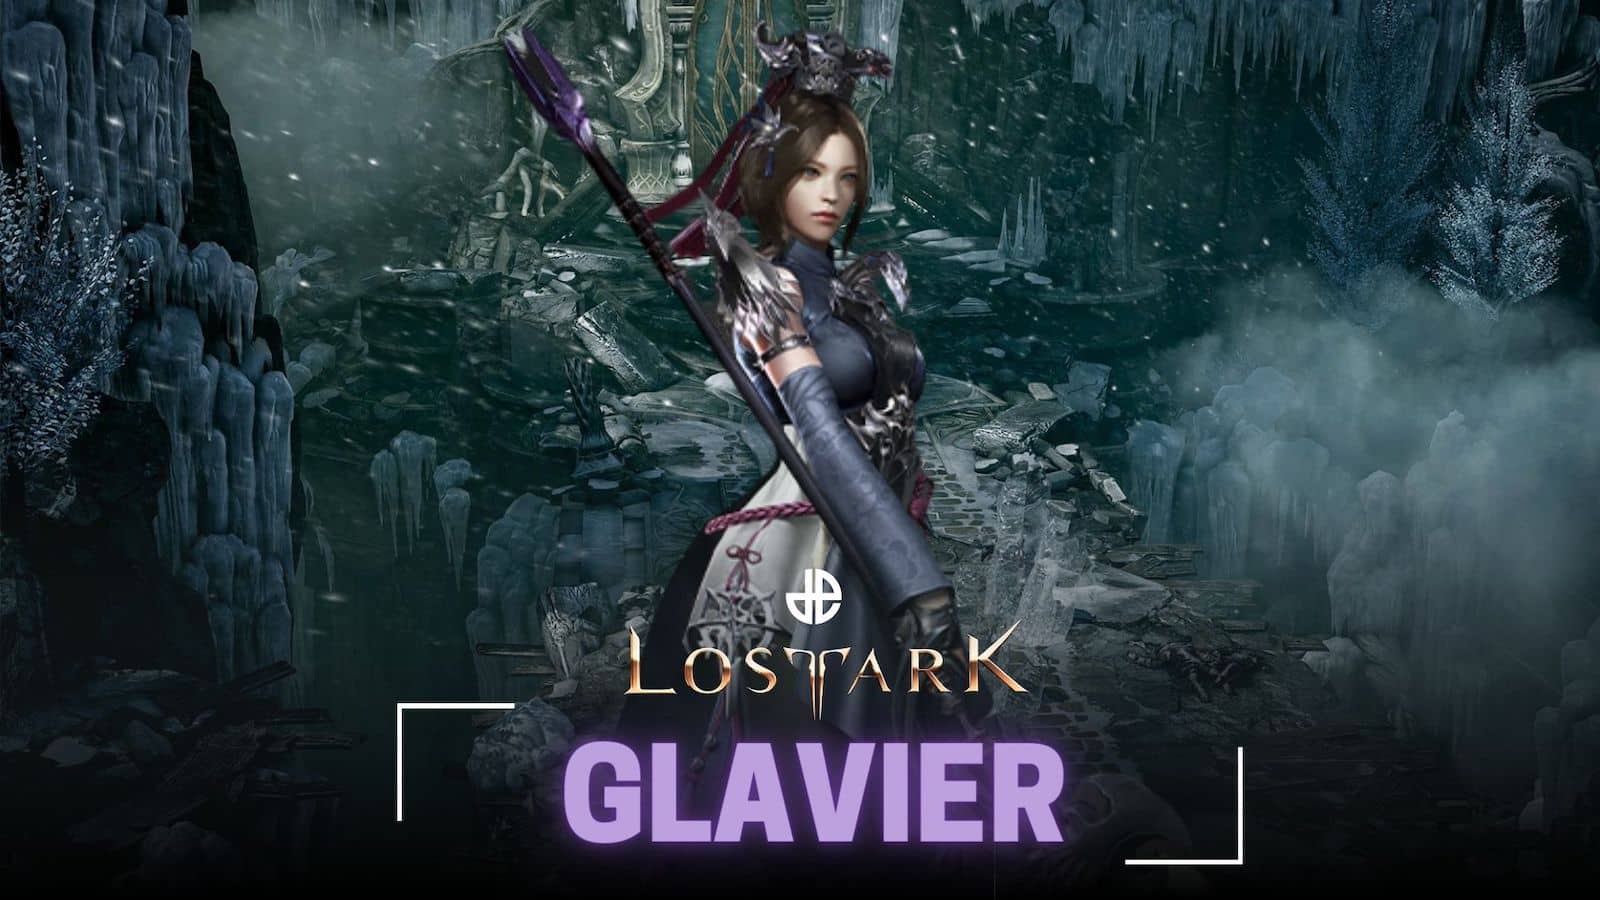 Lost Ark Glaivier Guide: How To Build A Glaivier - Fextralife